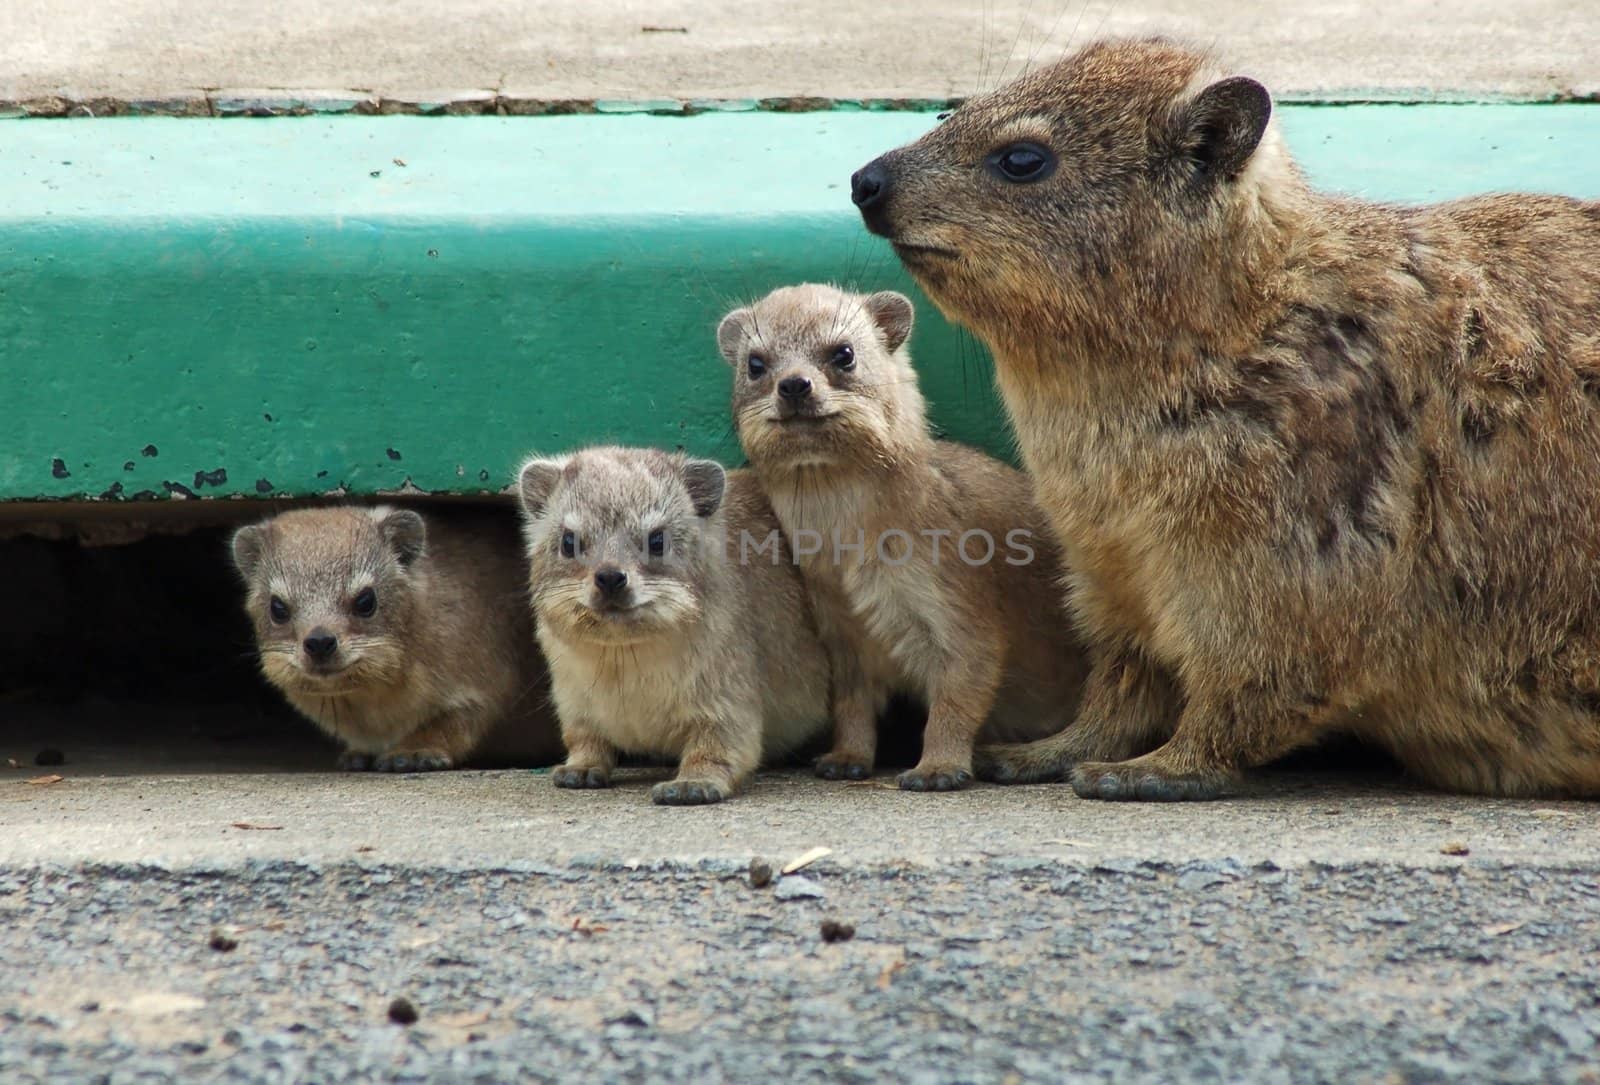 Cape Hyrax, or Rock Hyrax, (Procavia capensis) wild in South Africa.